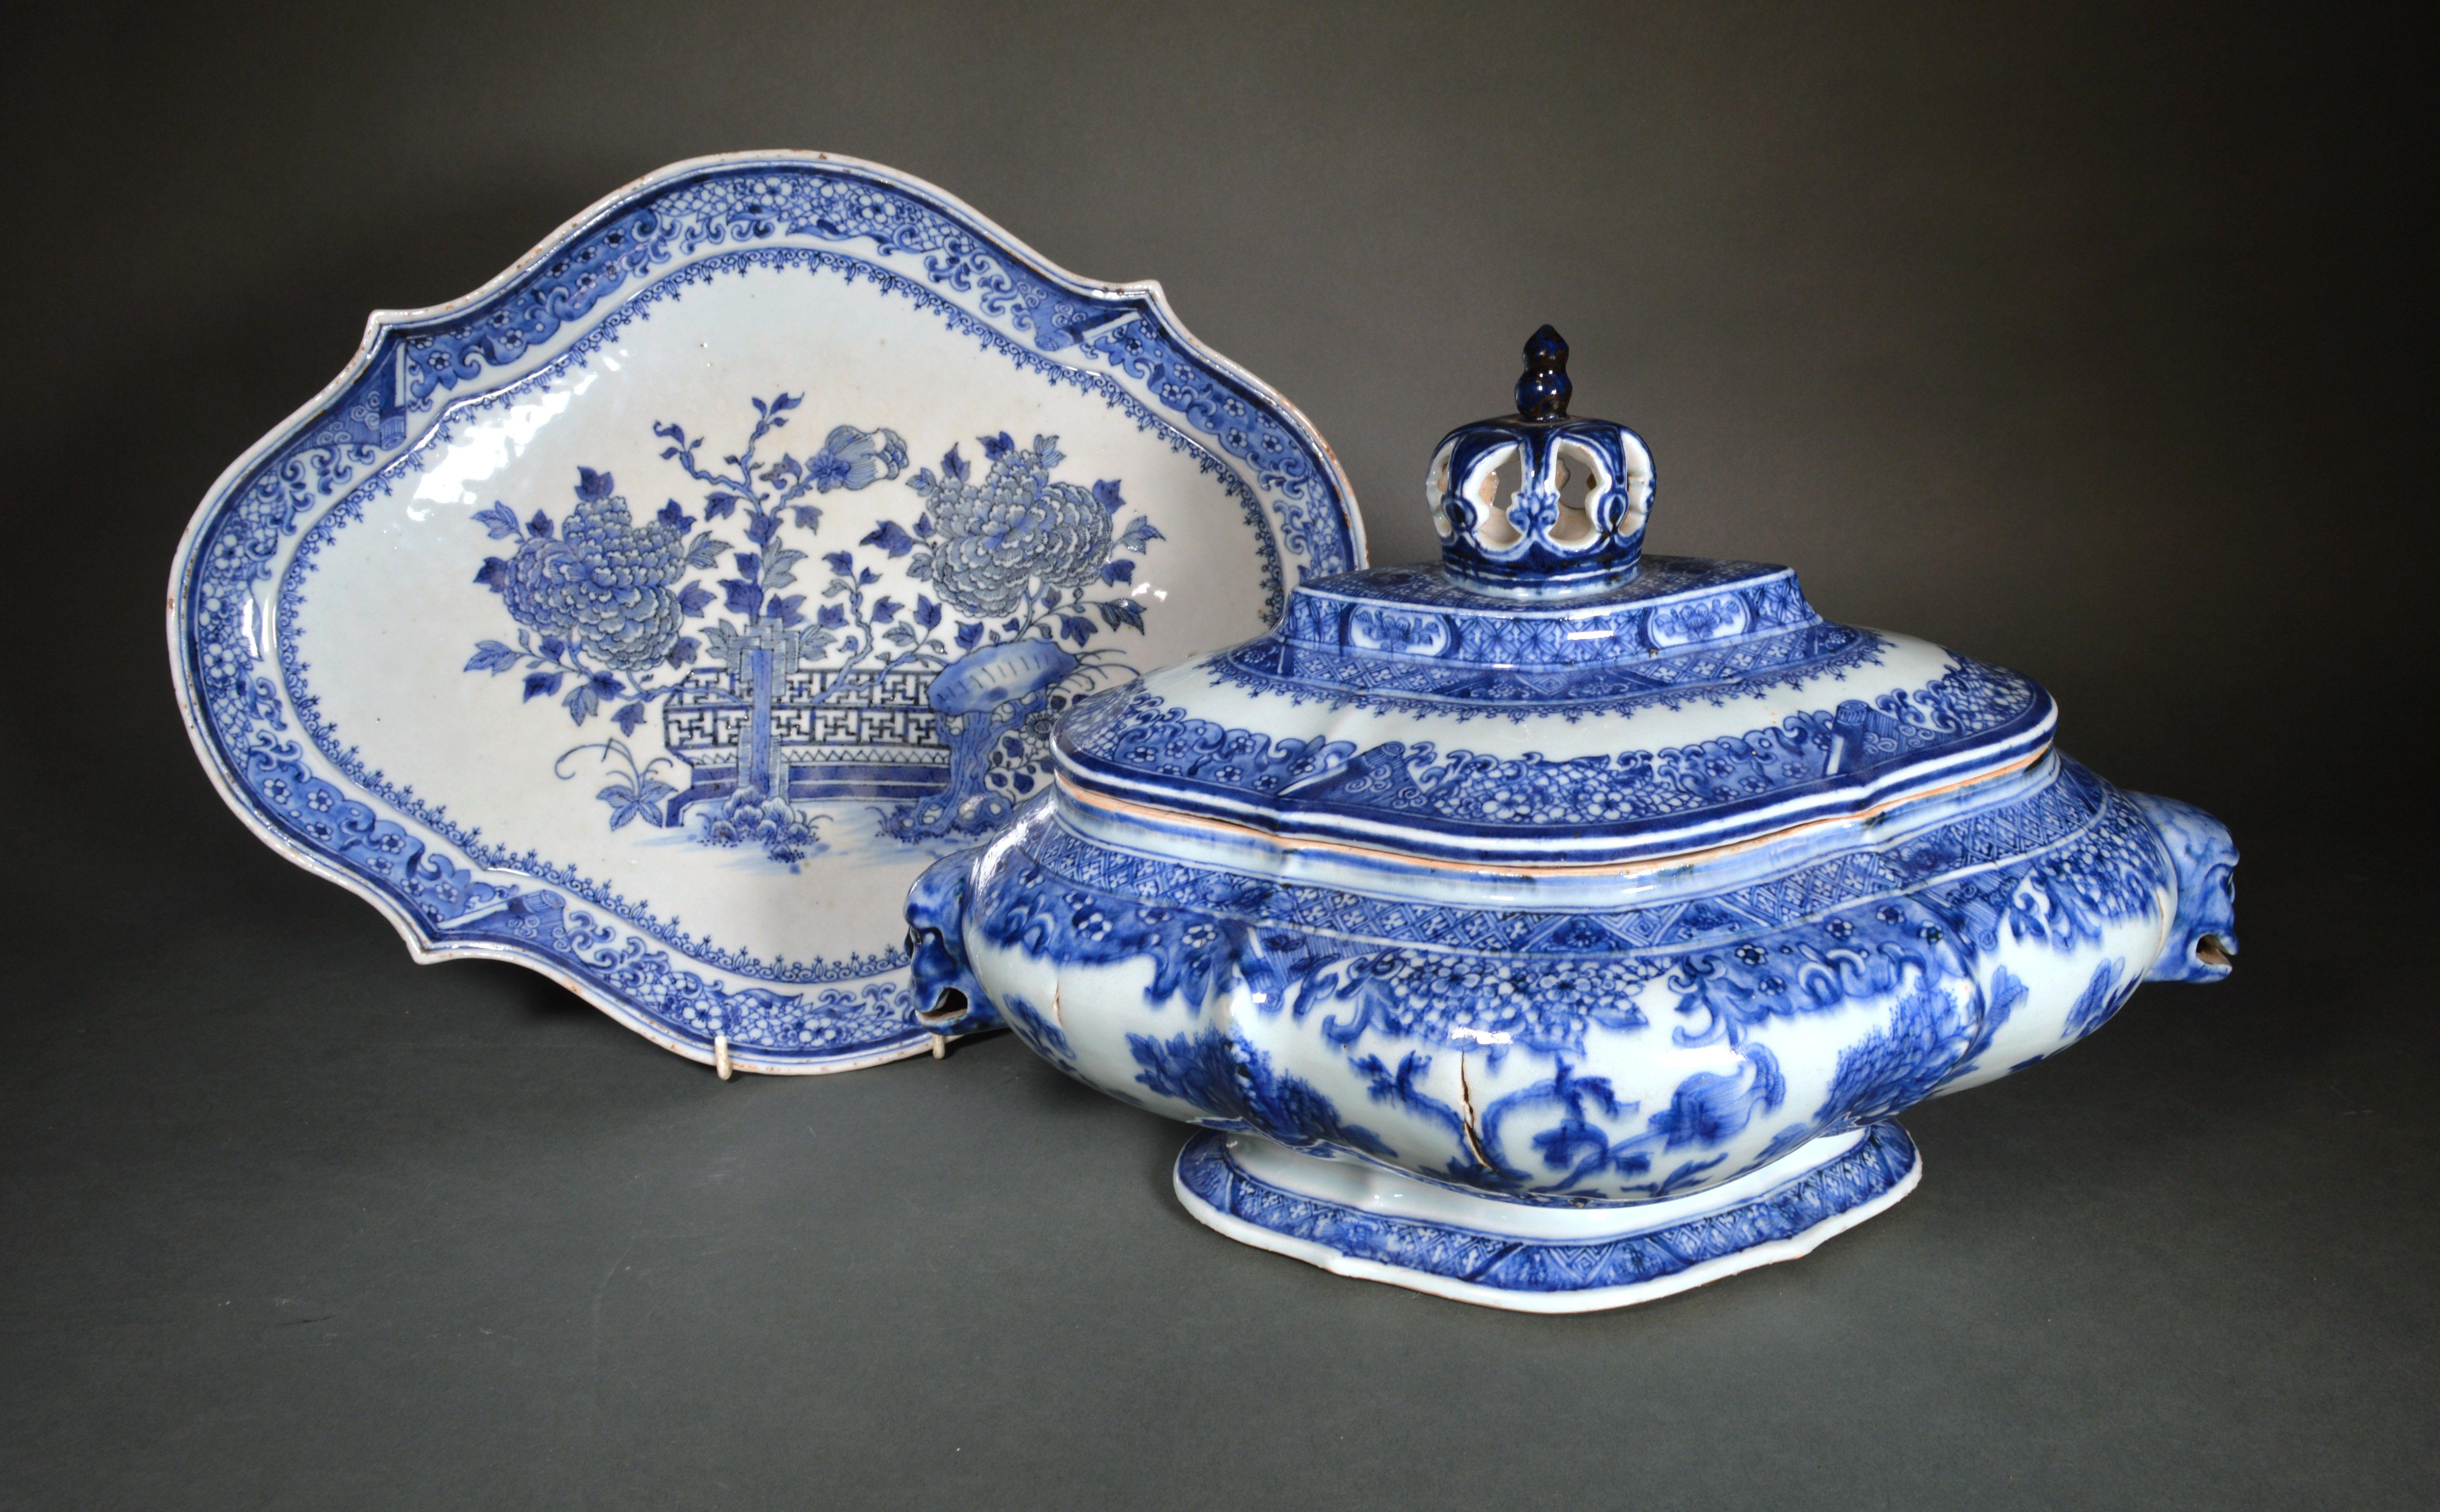 Early Chinese Export Porcelain Blue and White Soup Tureen, Cover and Stand In Good Condition For Sale In Downingtown, PA